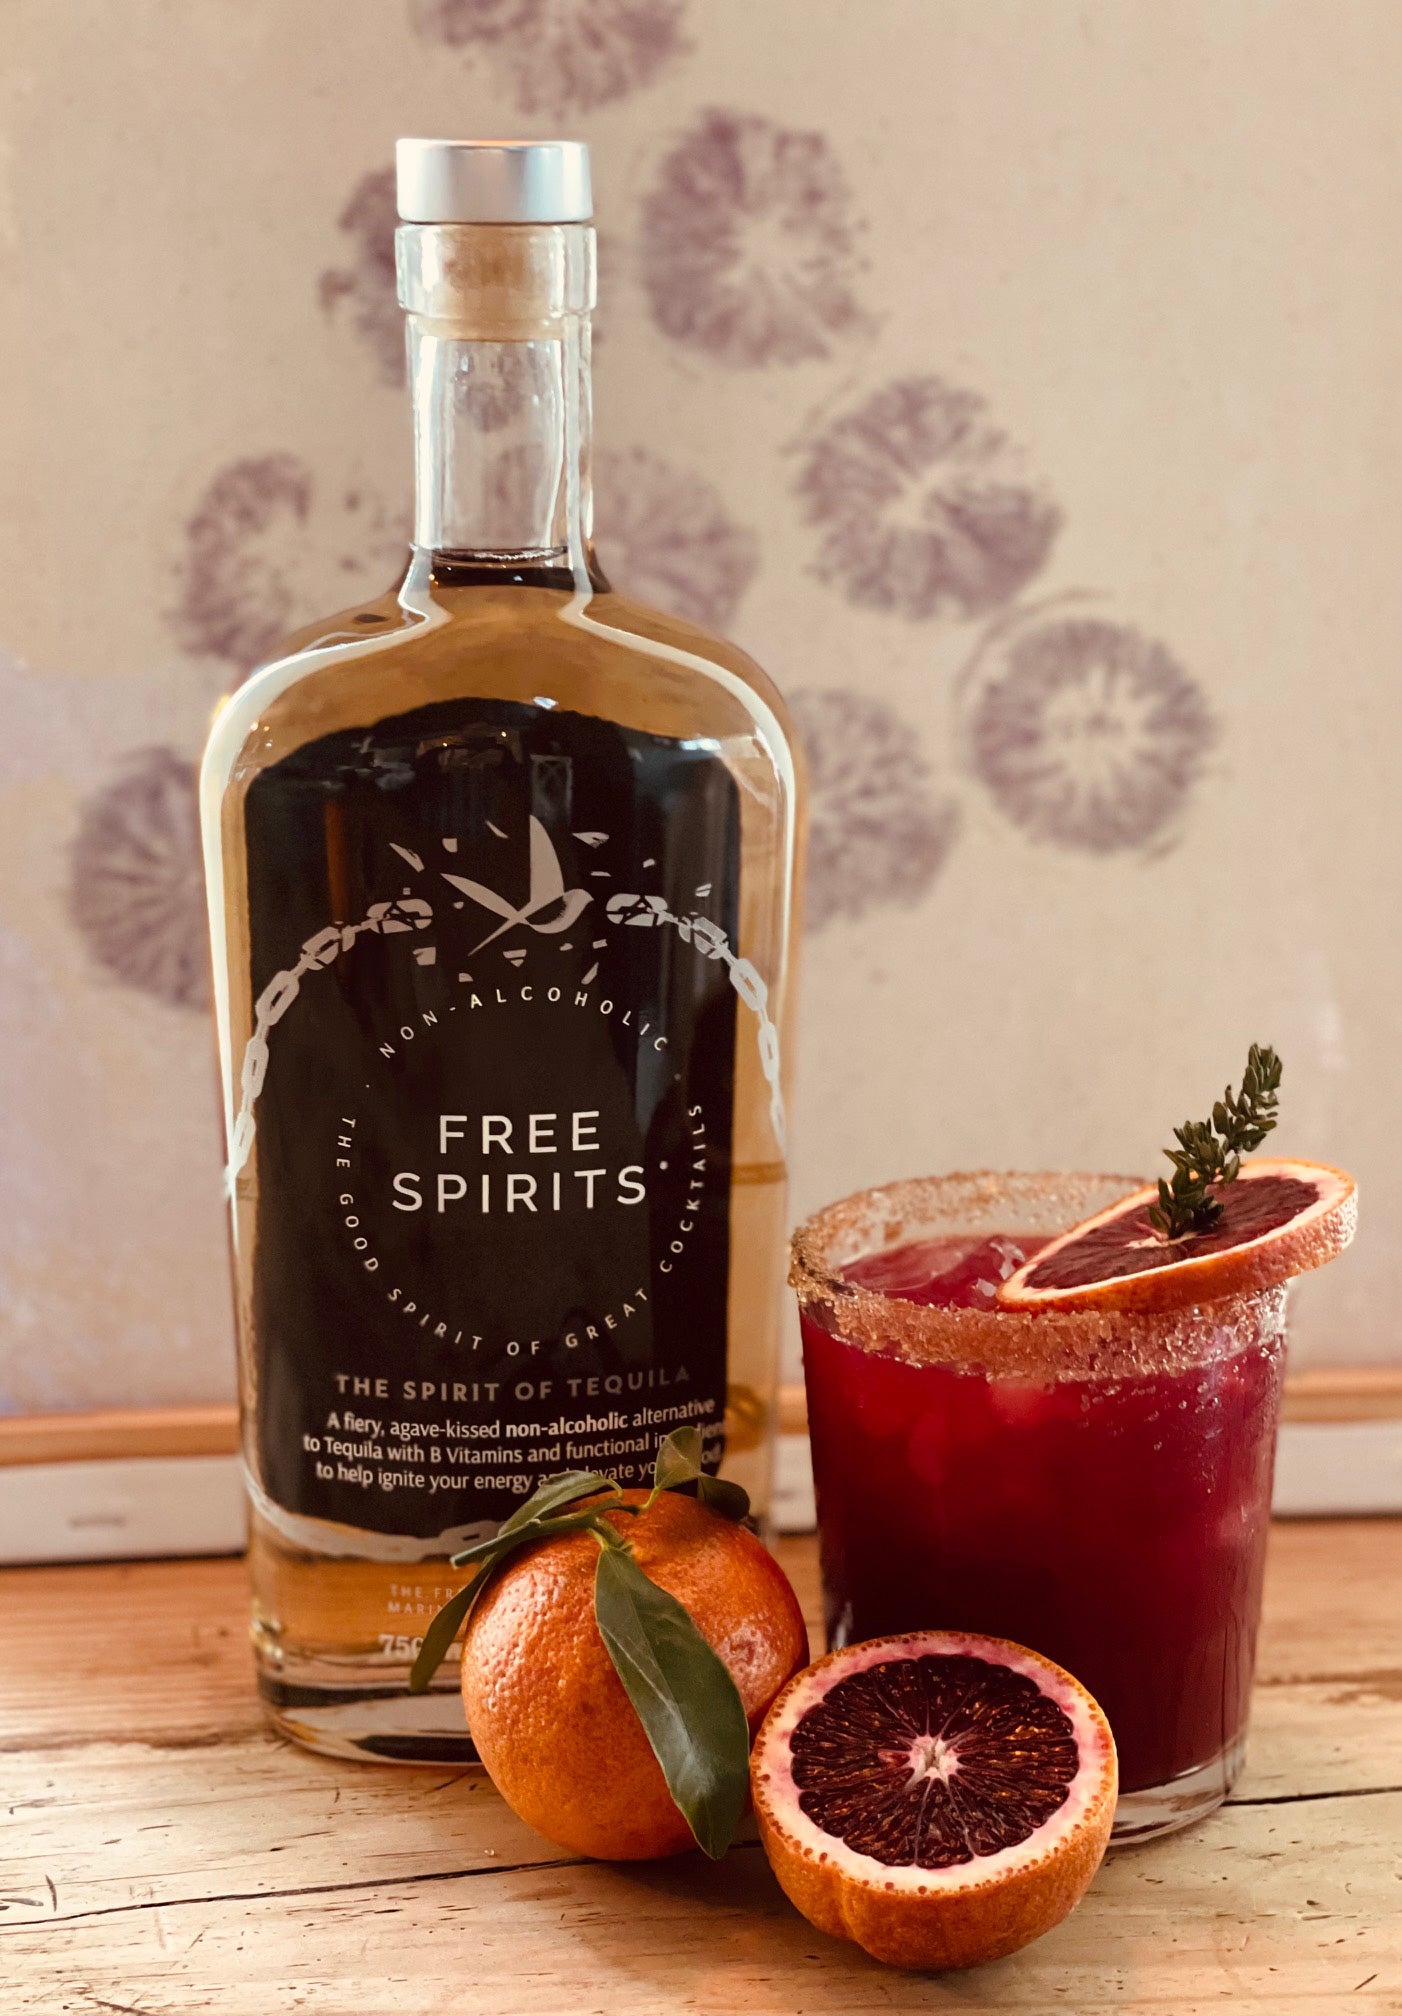 Blood Orange Margarita - Made with The Spirit of Tequila